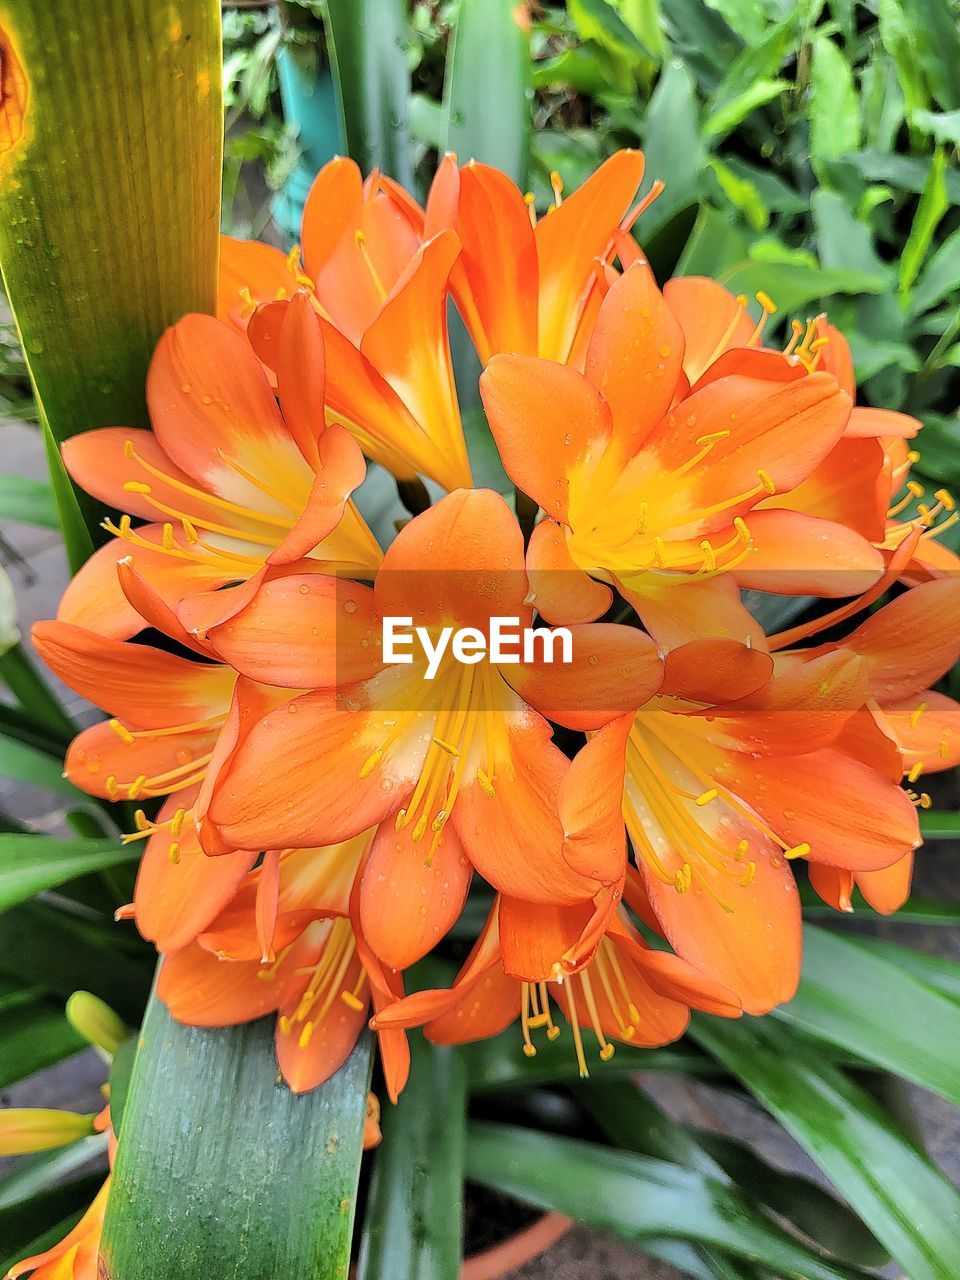 flower, flowering plant, plant, freshness, beauty in nature, petal, fragility, flower head, growth, inflorescence, close-up, orange color, nature, yellow, no people, botany, day, pollen, plant part, leaf, focus on foreground, outdoors, springtime, blossom, lily, green, stamen